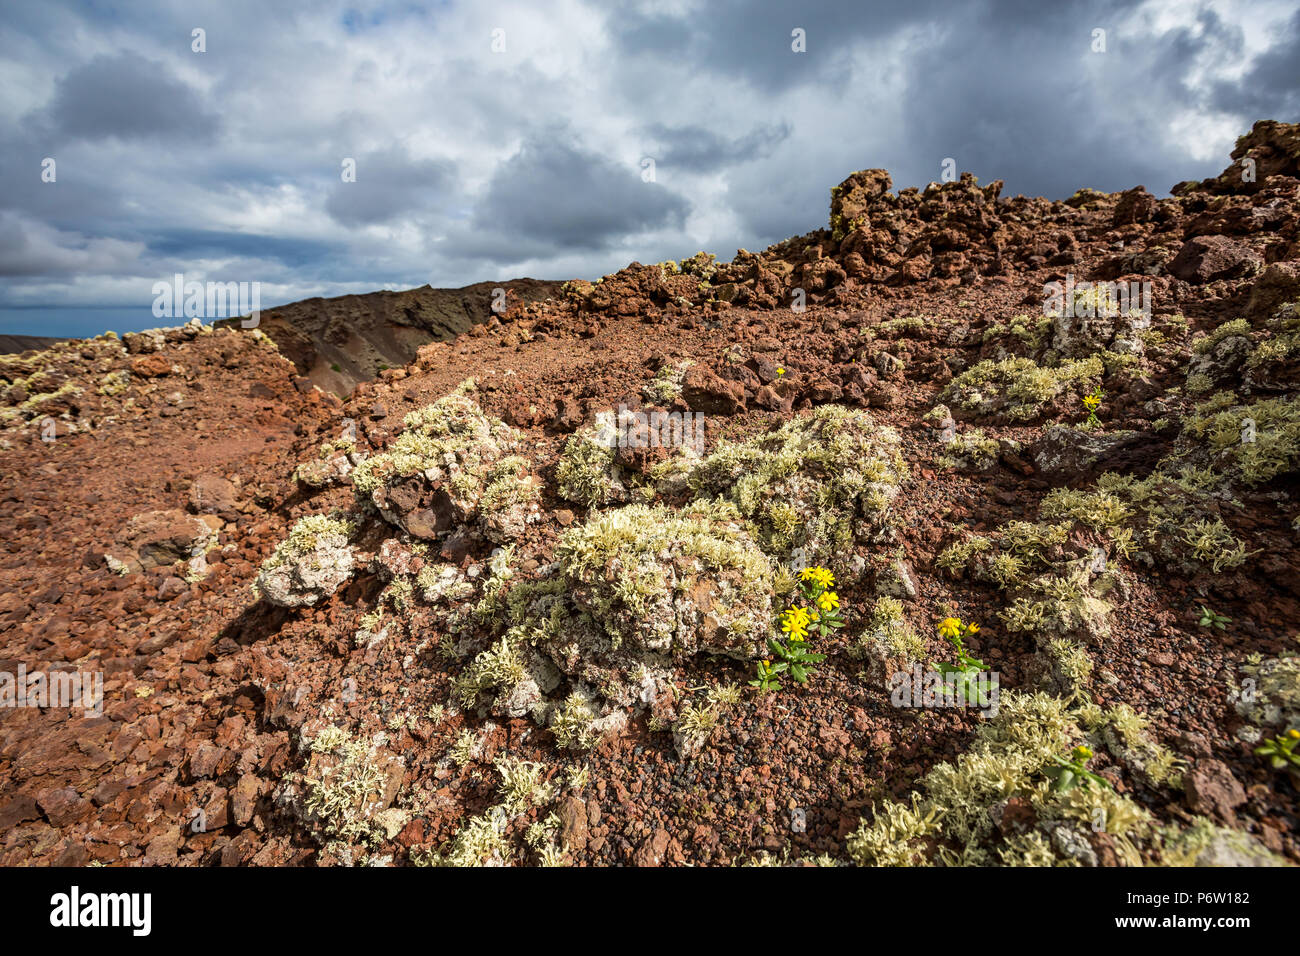 Tiny yellow plants blossoming with yellow flowers survive on a volcano hillslope in Lanzarote, Canary Islands, Spain Stock Photo